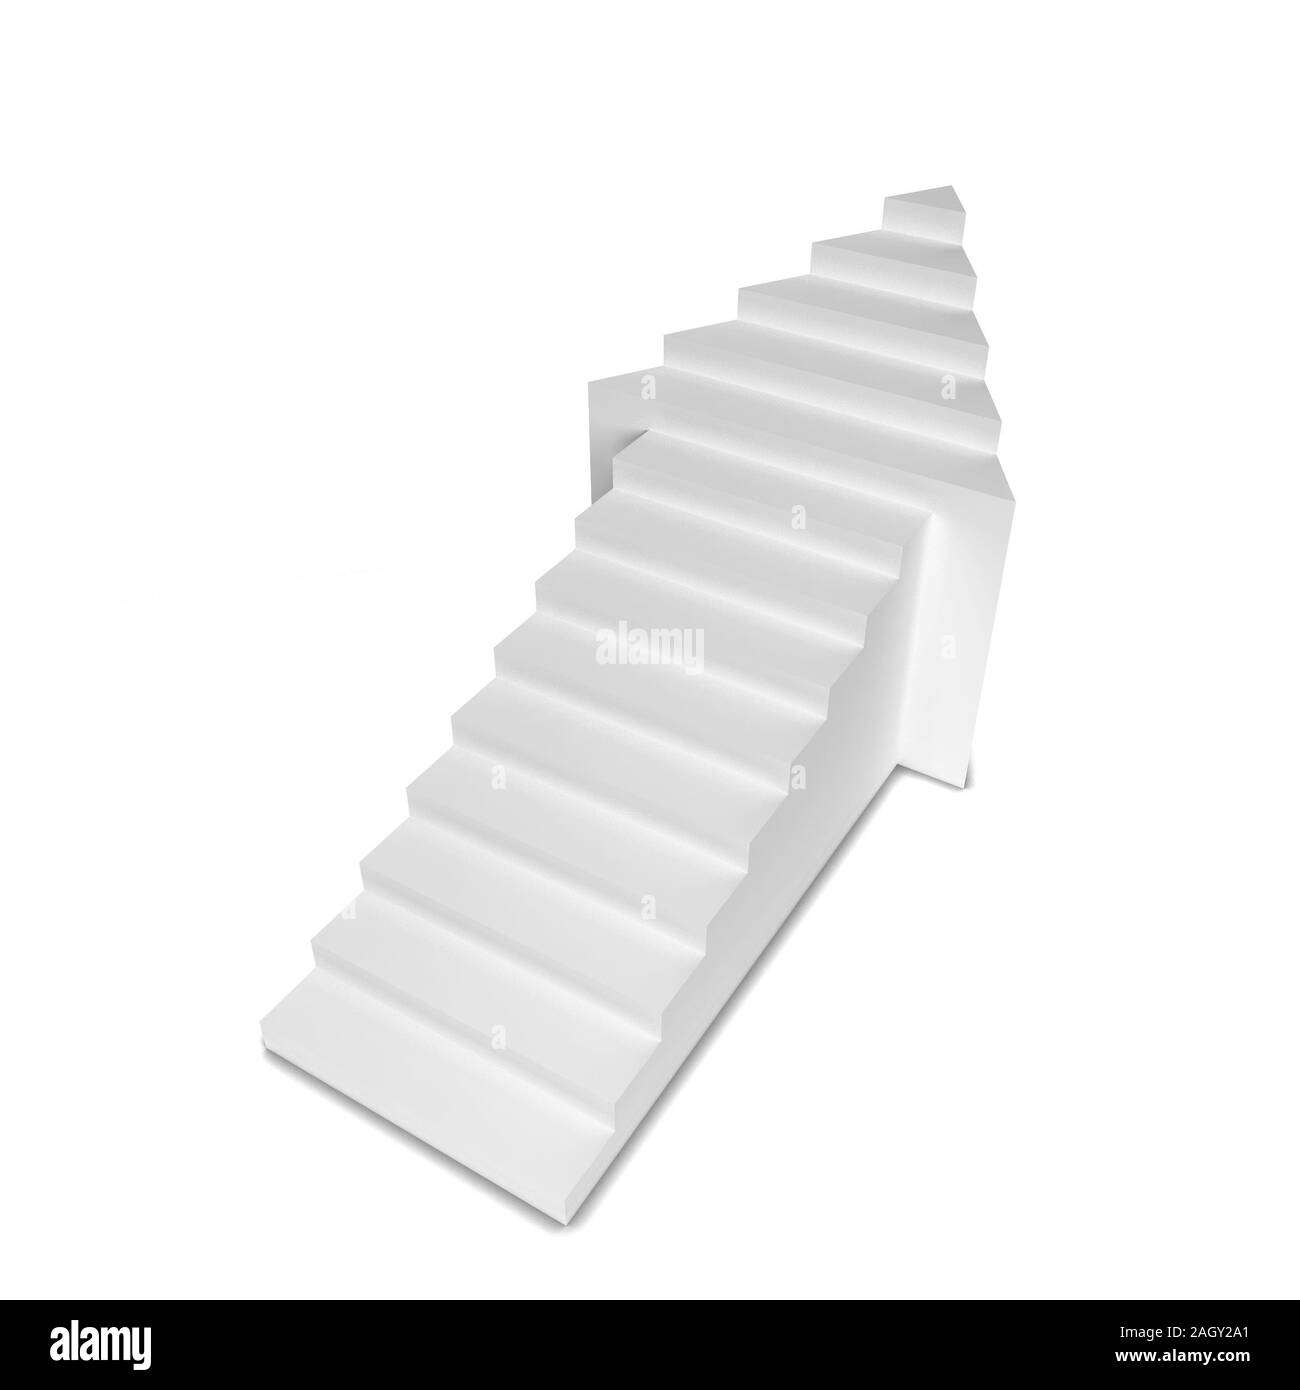 Ladder in a form of an arrow. 3d illustration isolated on white background Stock Photo